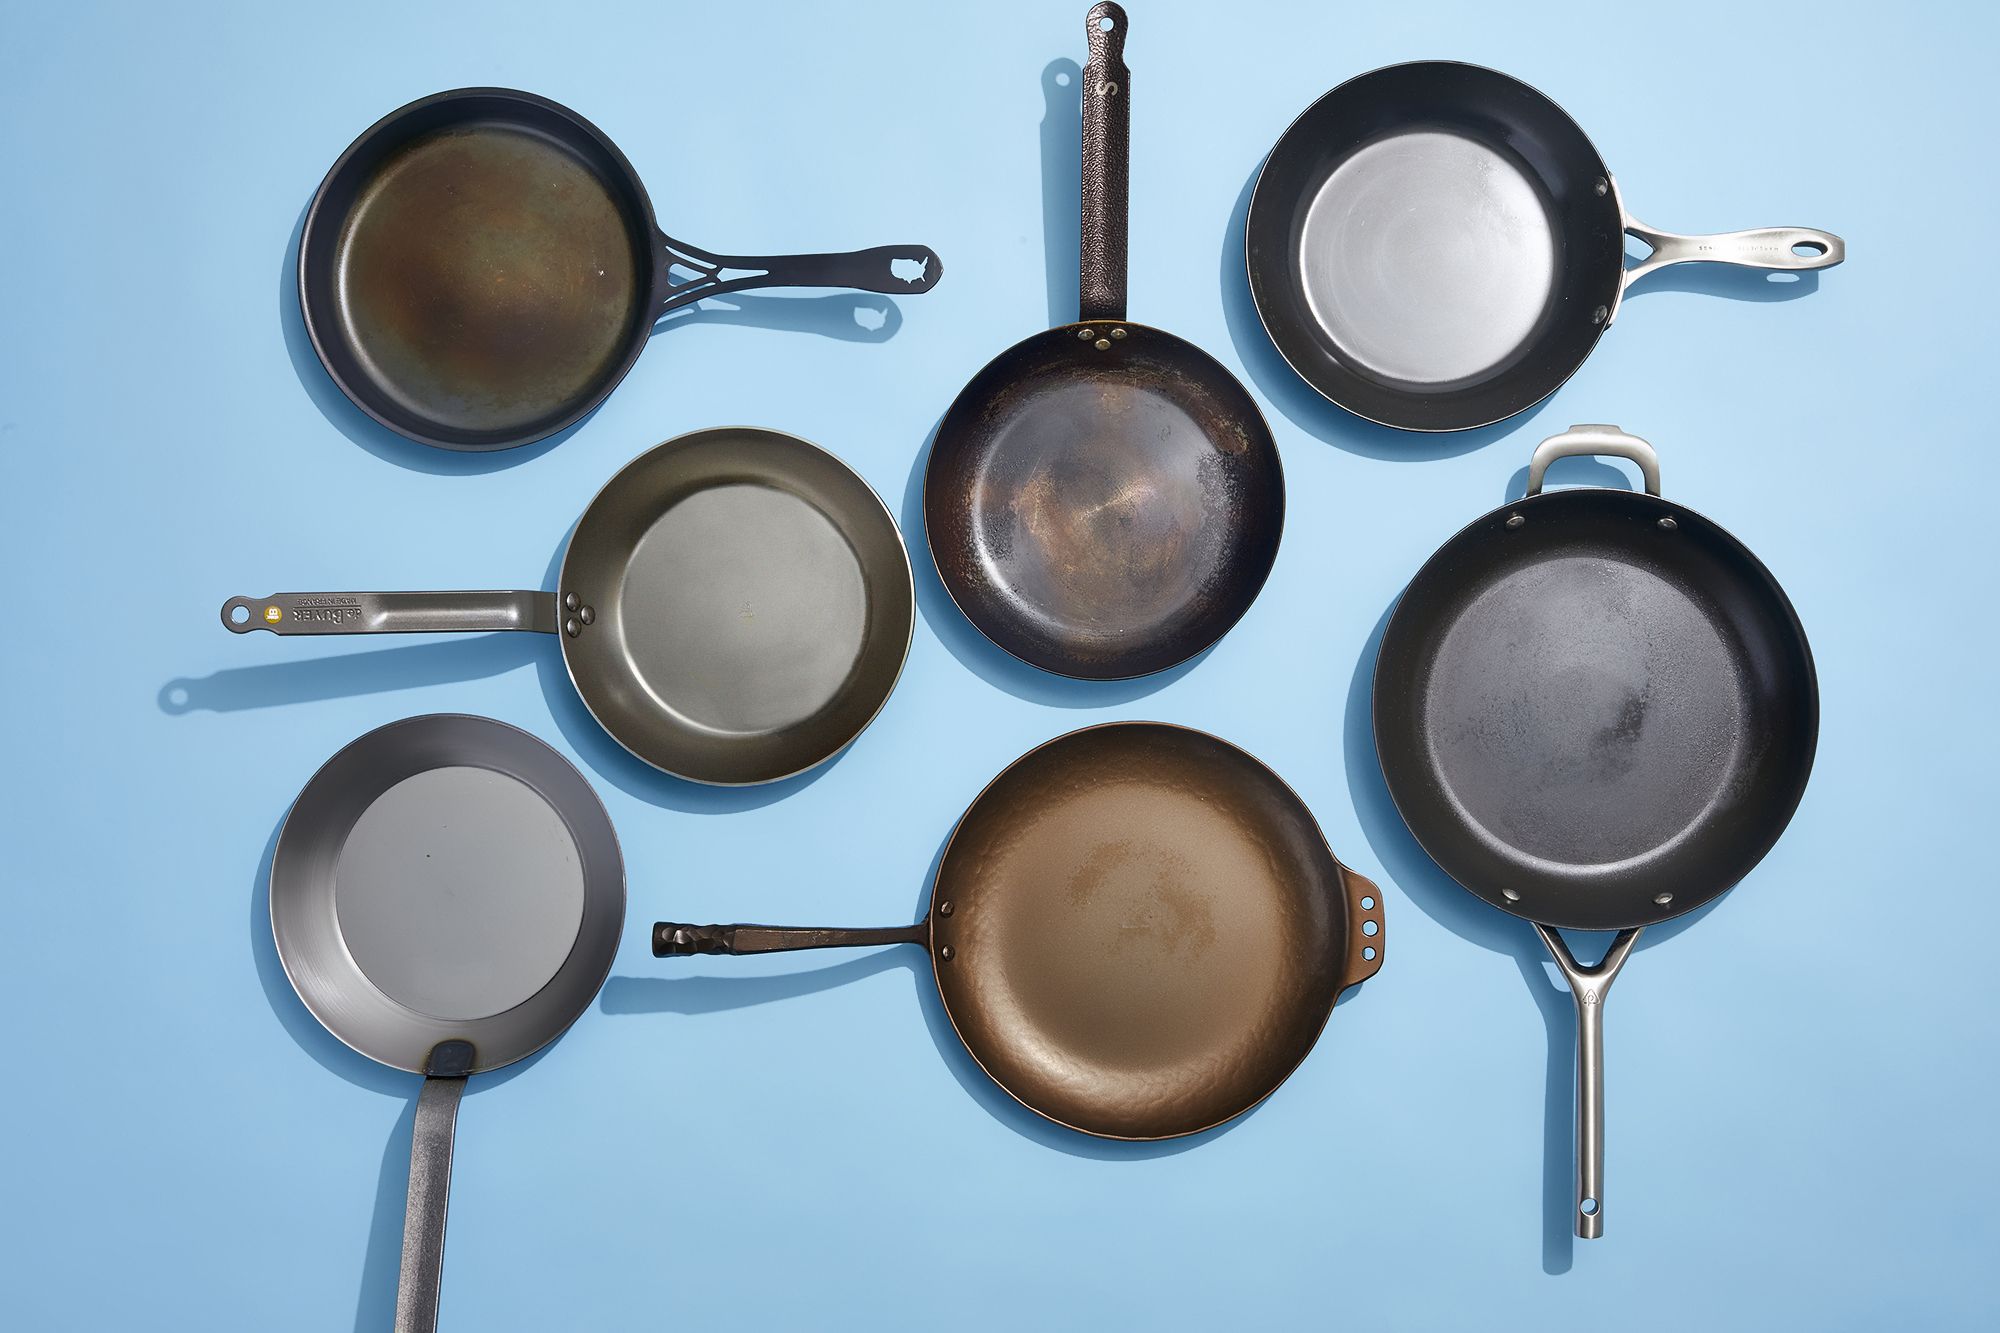 8 Best Carbon Steel Skillets of 2022, Tested by Pros